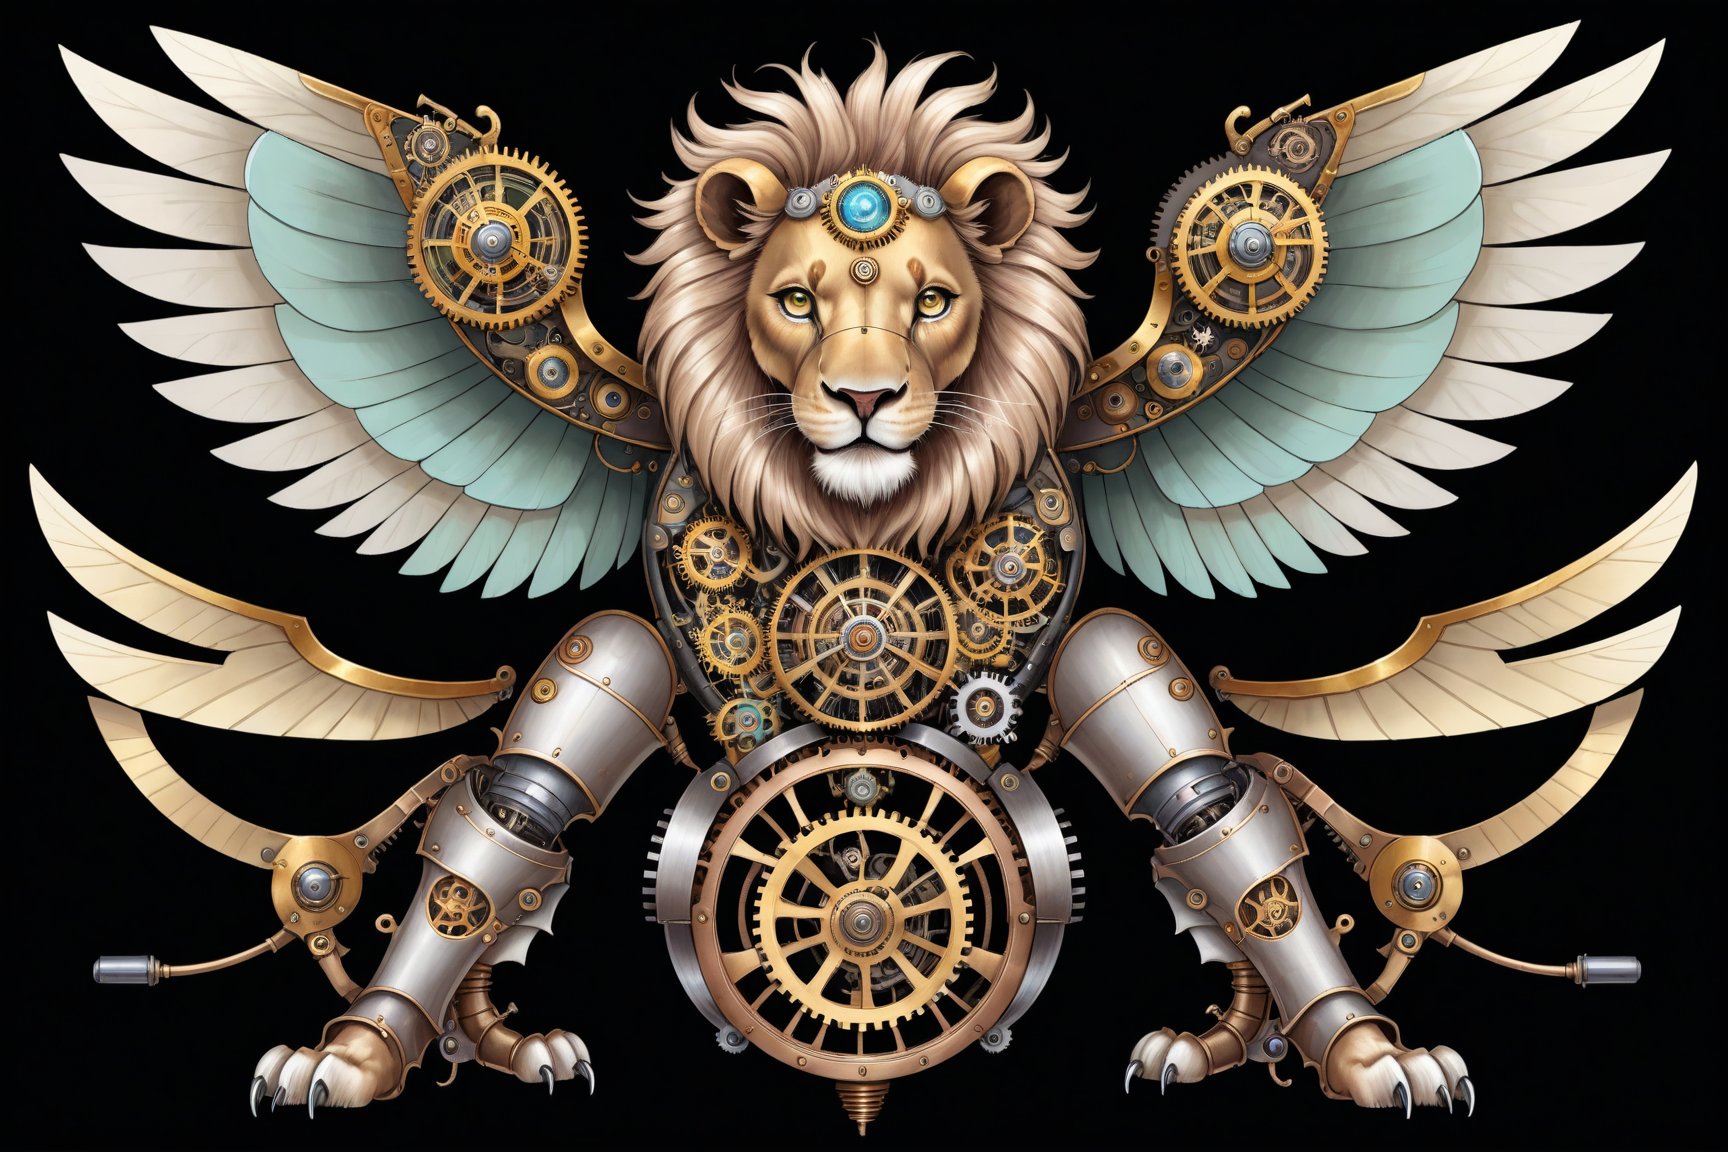 Generates a detailed steampunk style image with pastel colors and golden brown of a lion with wing seen from above. The beetle must be adorned with intricate gears and mechanical elements that imitate its natural structure. The image must be high resolution and show a perfect fusion between the organic and the mechanical, black background,DonMSt34mPXL,steampunk,steampunk style